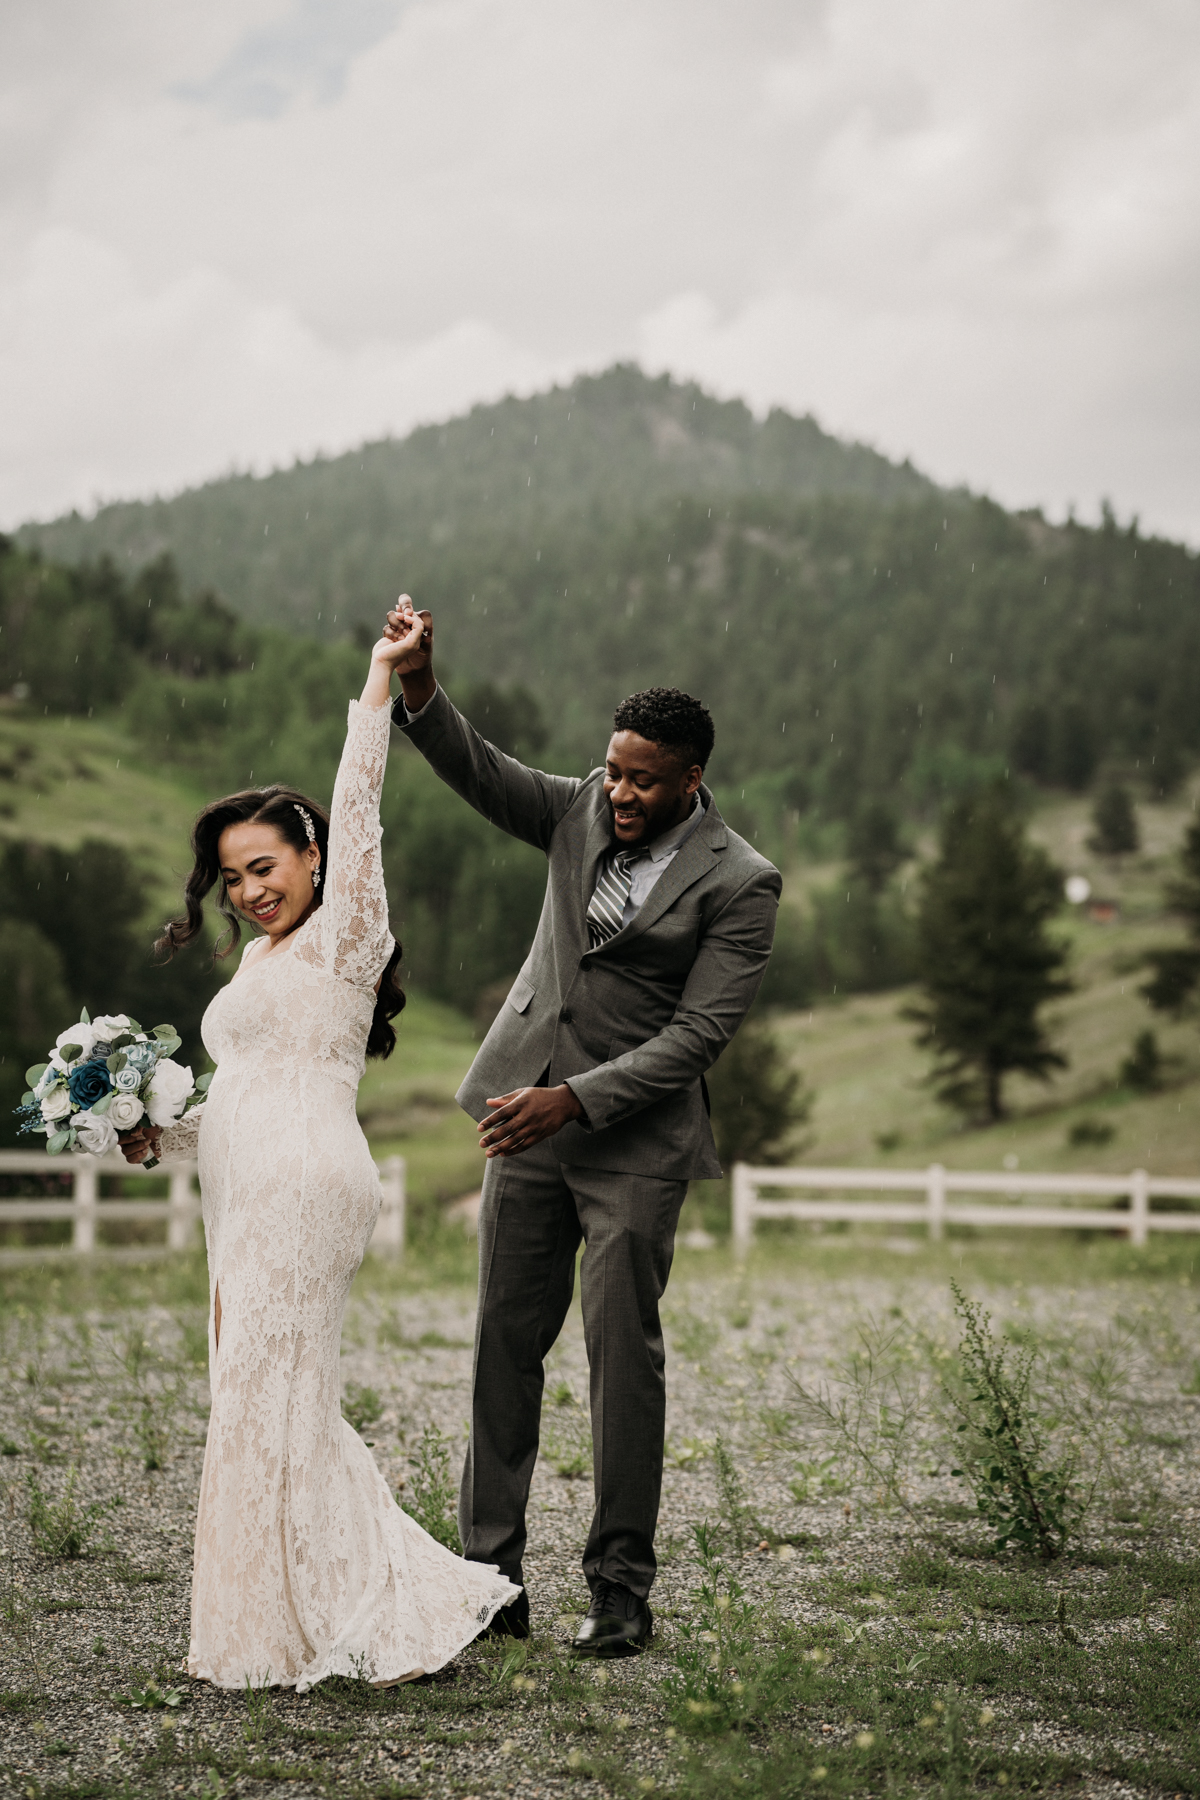 Navigating Poor Weather on Your Wedding Day